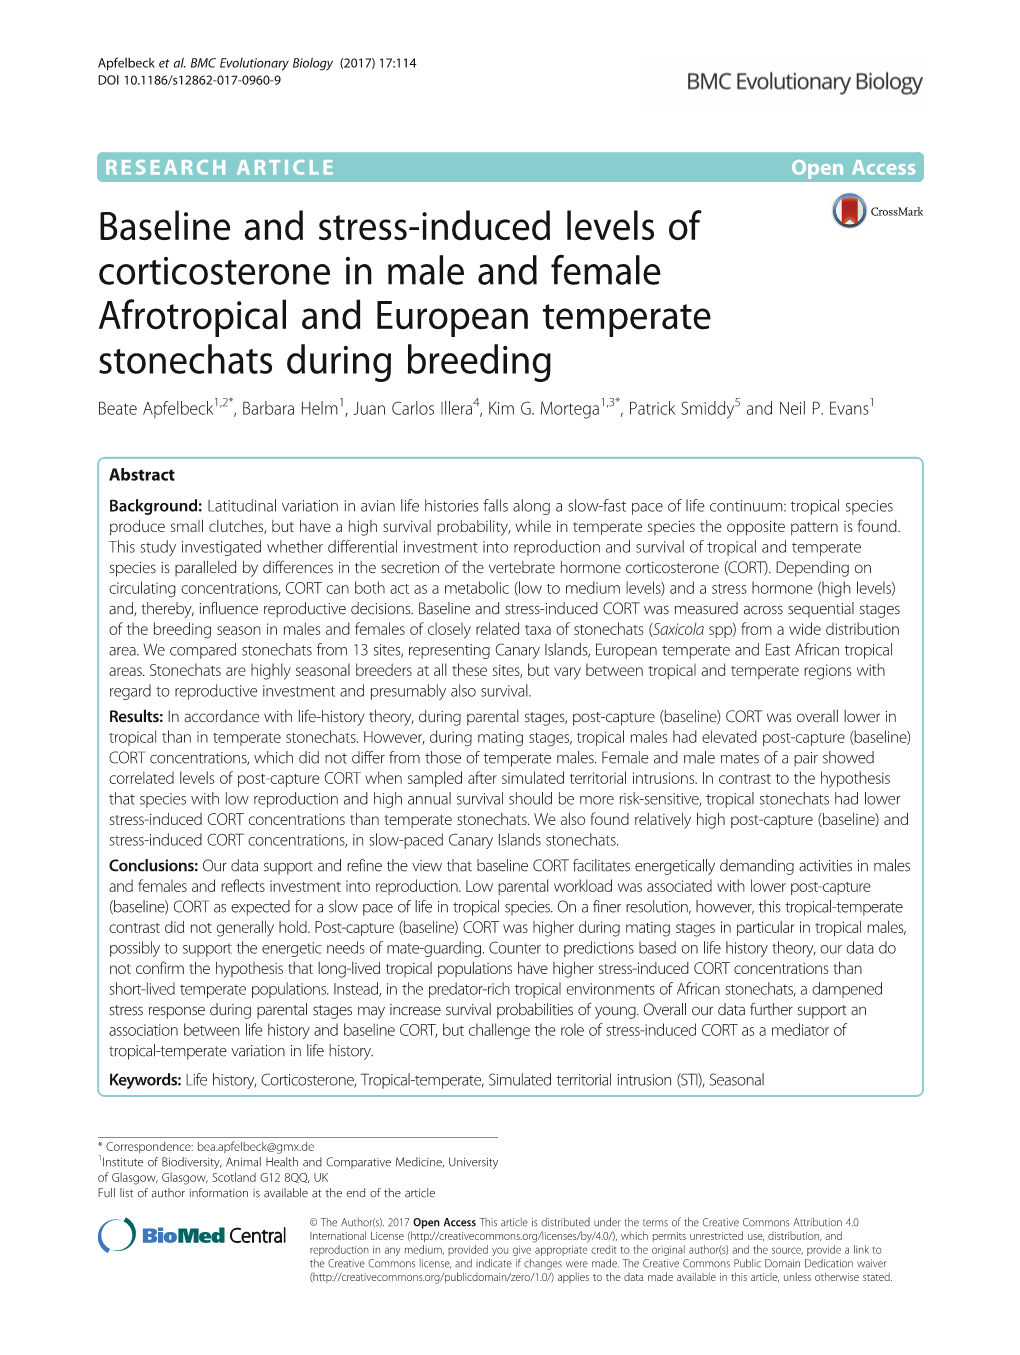 Baseline and Stress-Induced Levels of Corticosterone in Male and Female